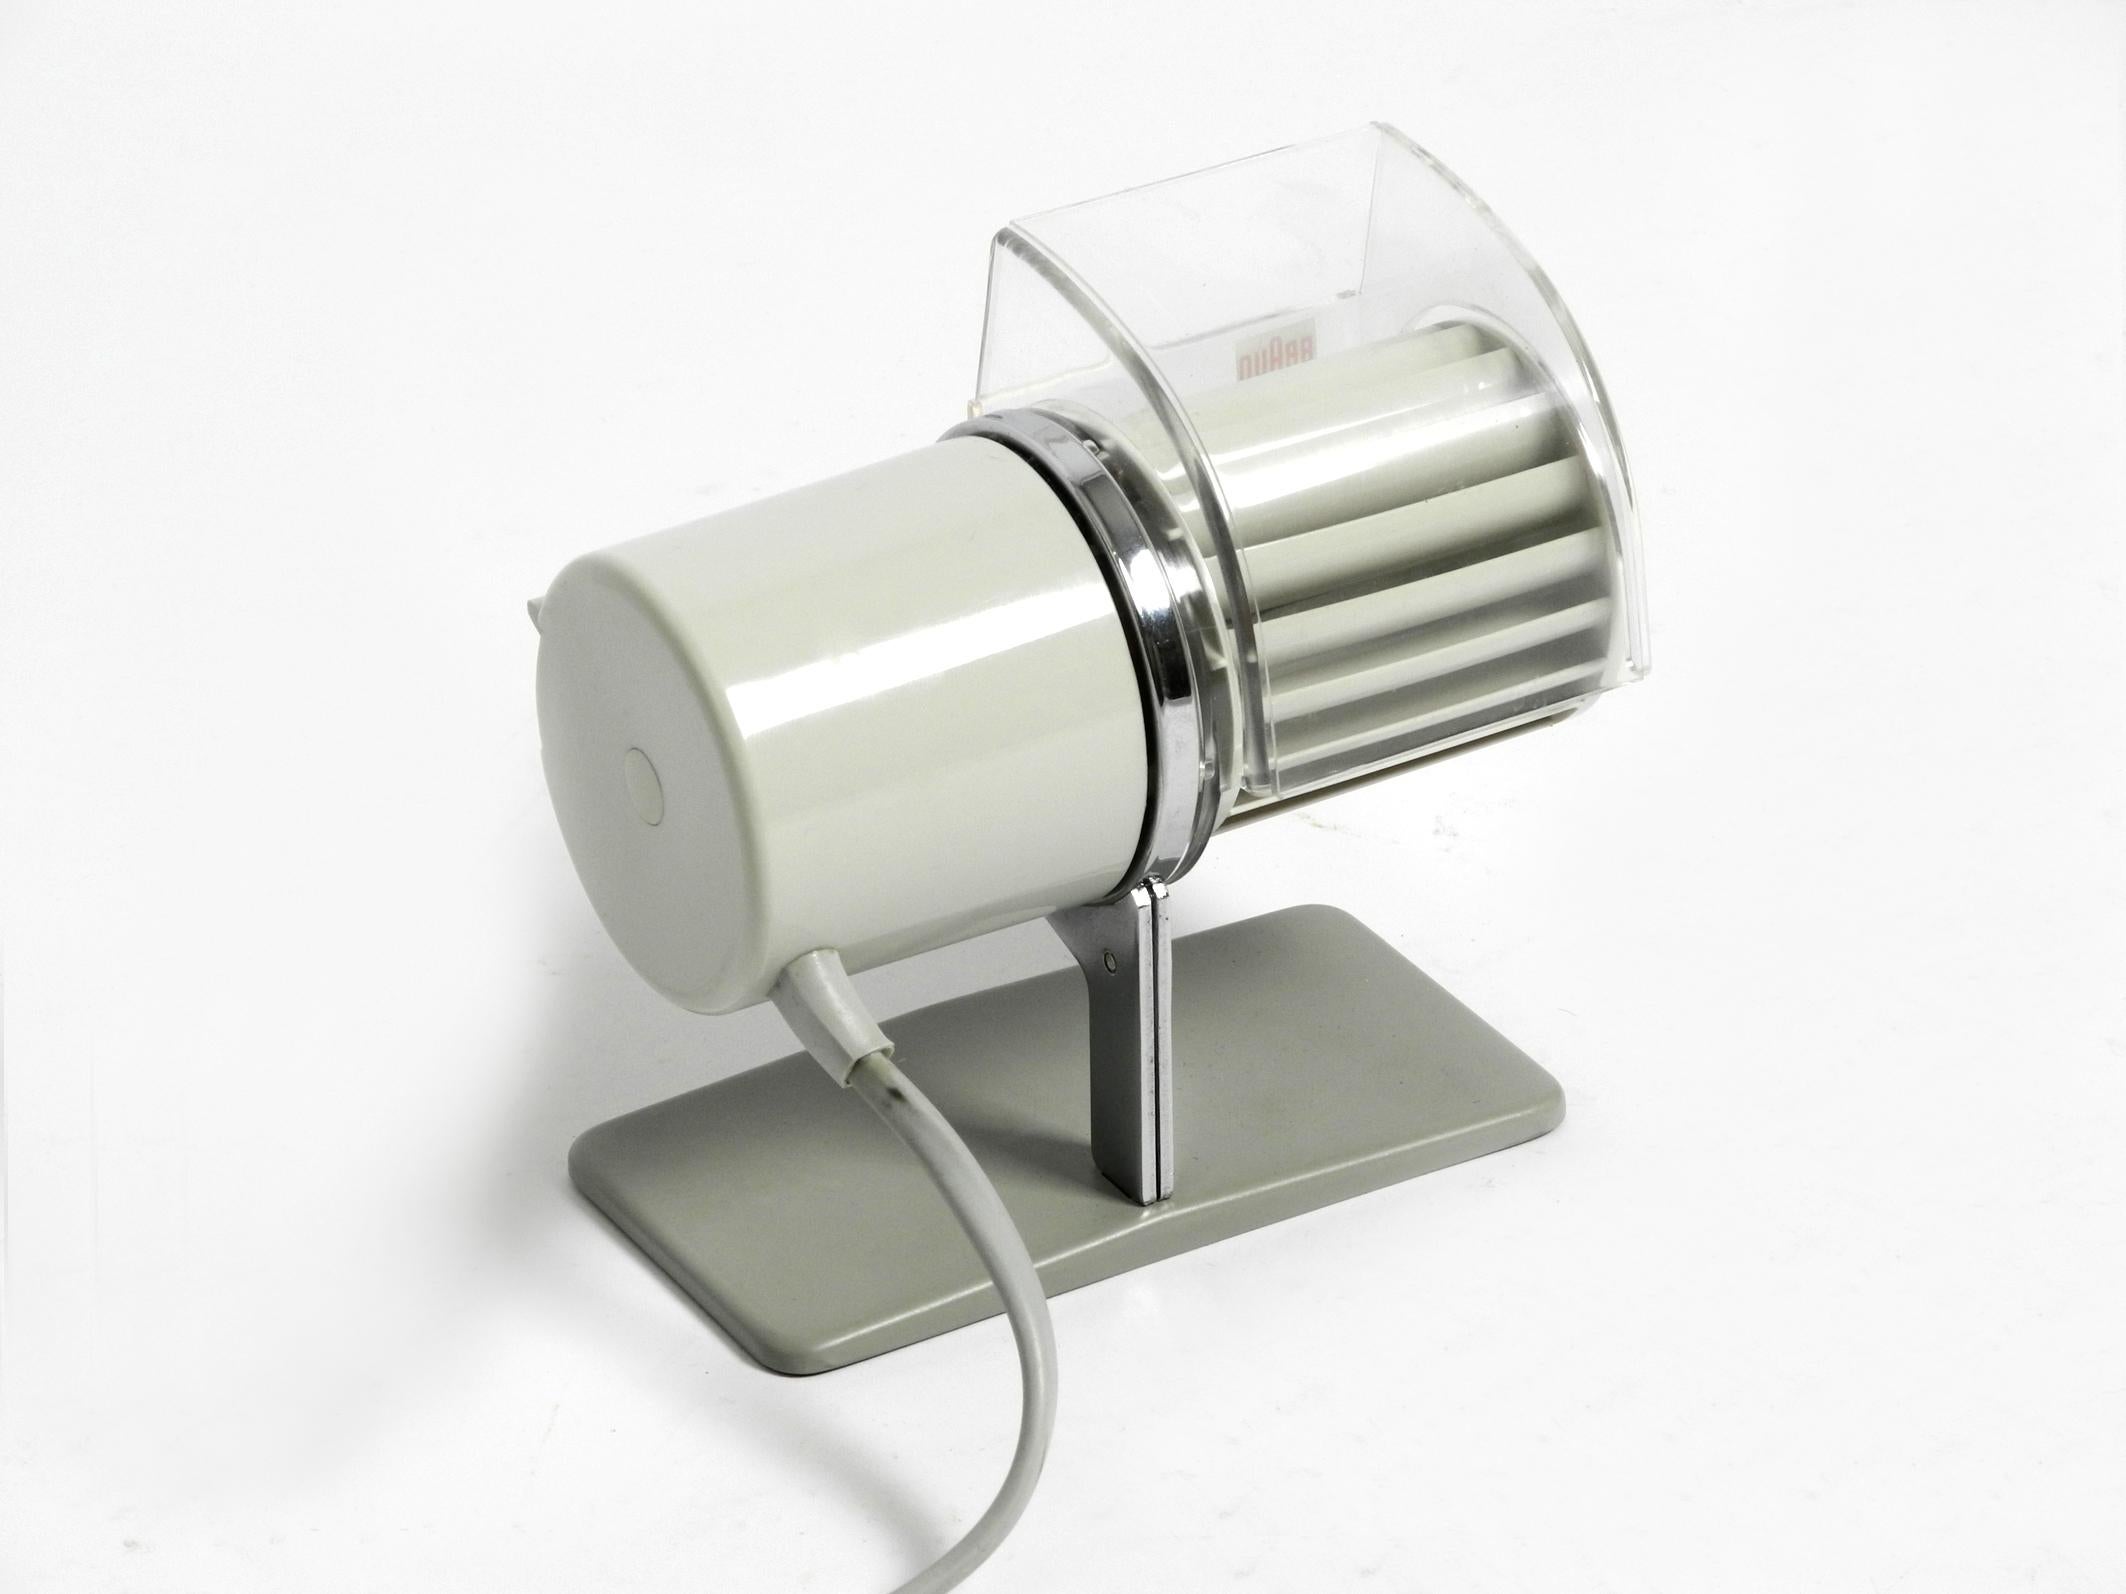 Original BRAUN table fan HL 1 from 1961.
Design by Reinhold Weiss. Made in W. Germany
Air outlet can be continuously rotated. 2 levels. Wall mounting is also possible, with original hooks on the bottom of the base. Housing is made of metal and